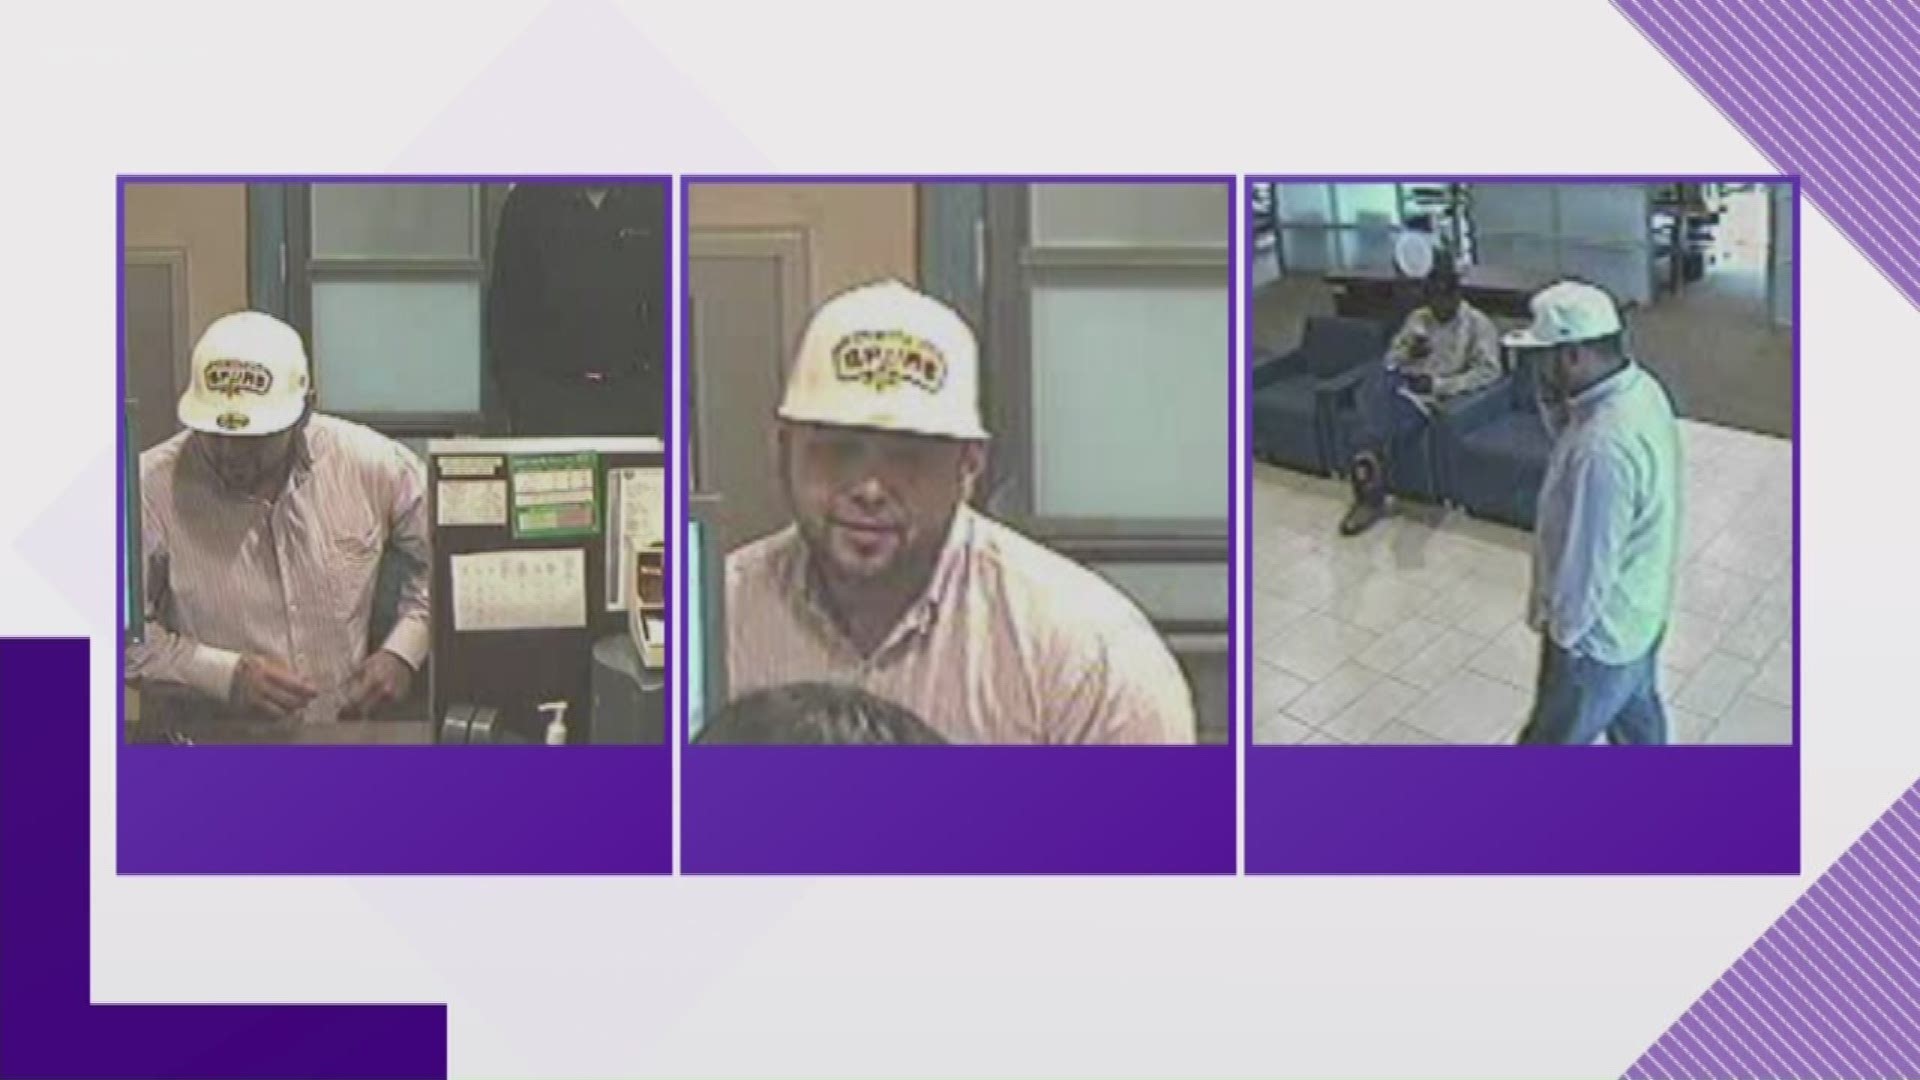 If you recognize the suspect and have information on his whereabouts contact Crime Stoppers at 210-224-7876.